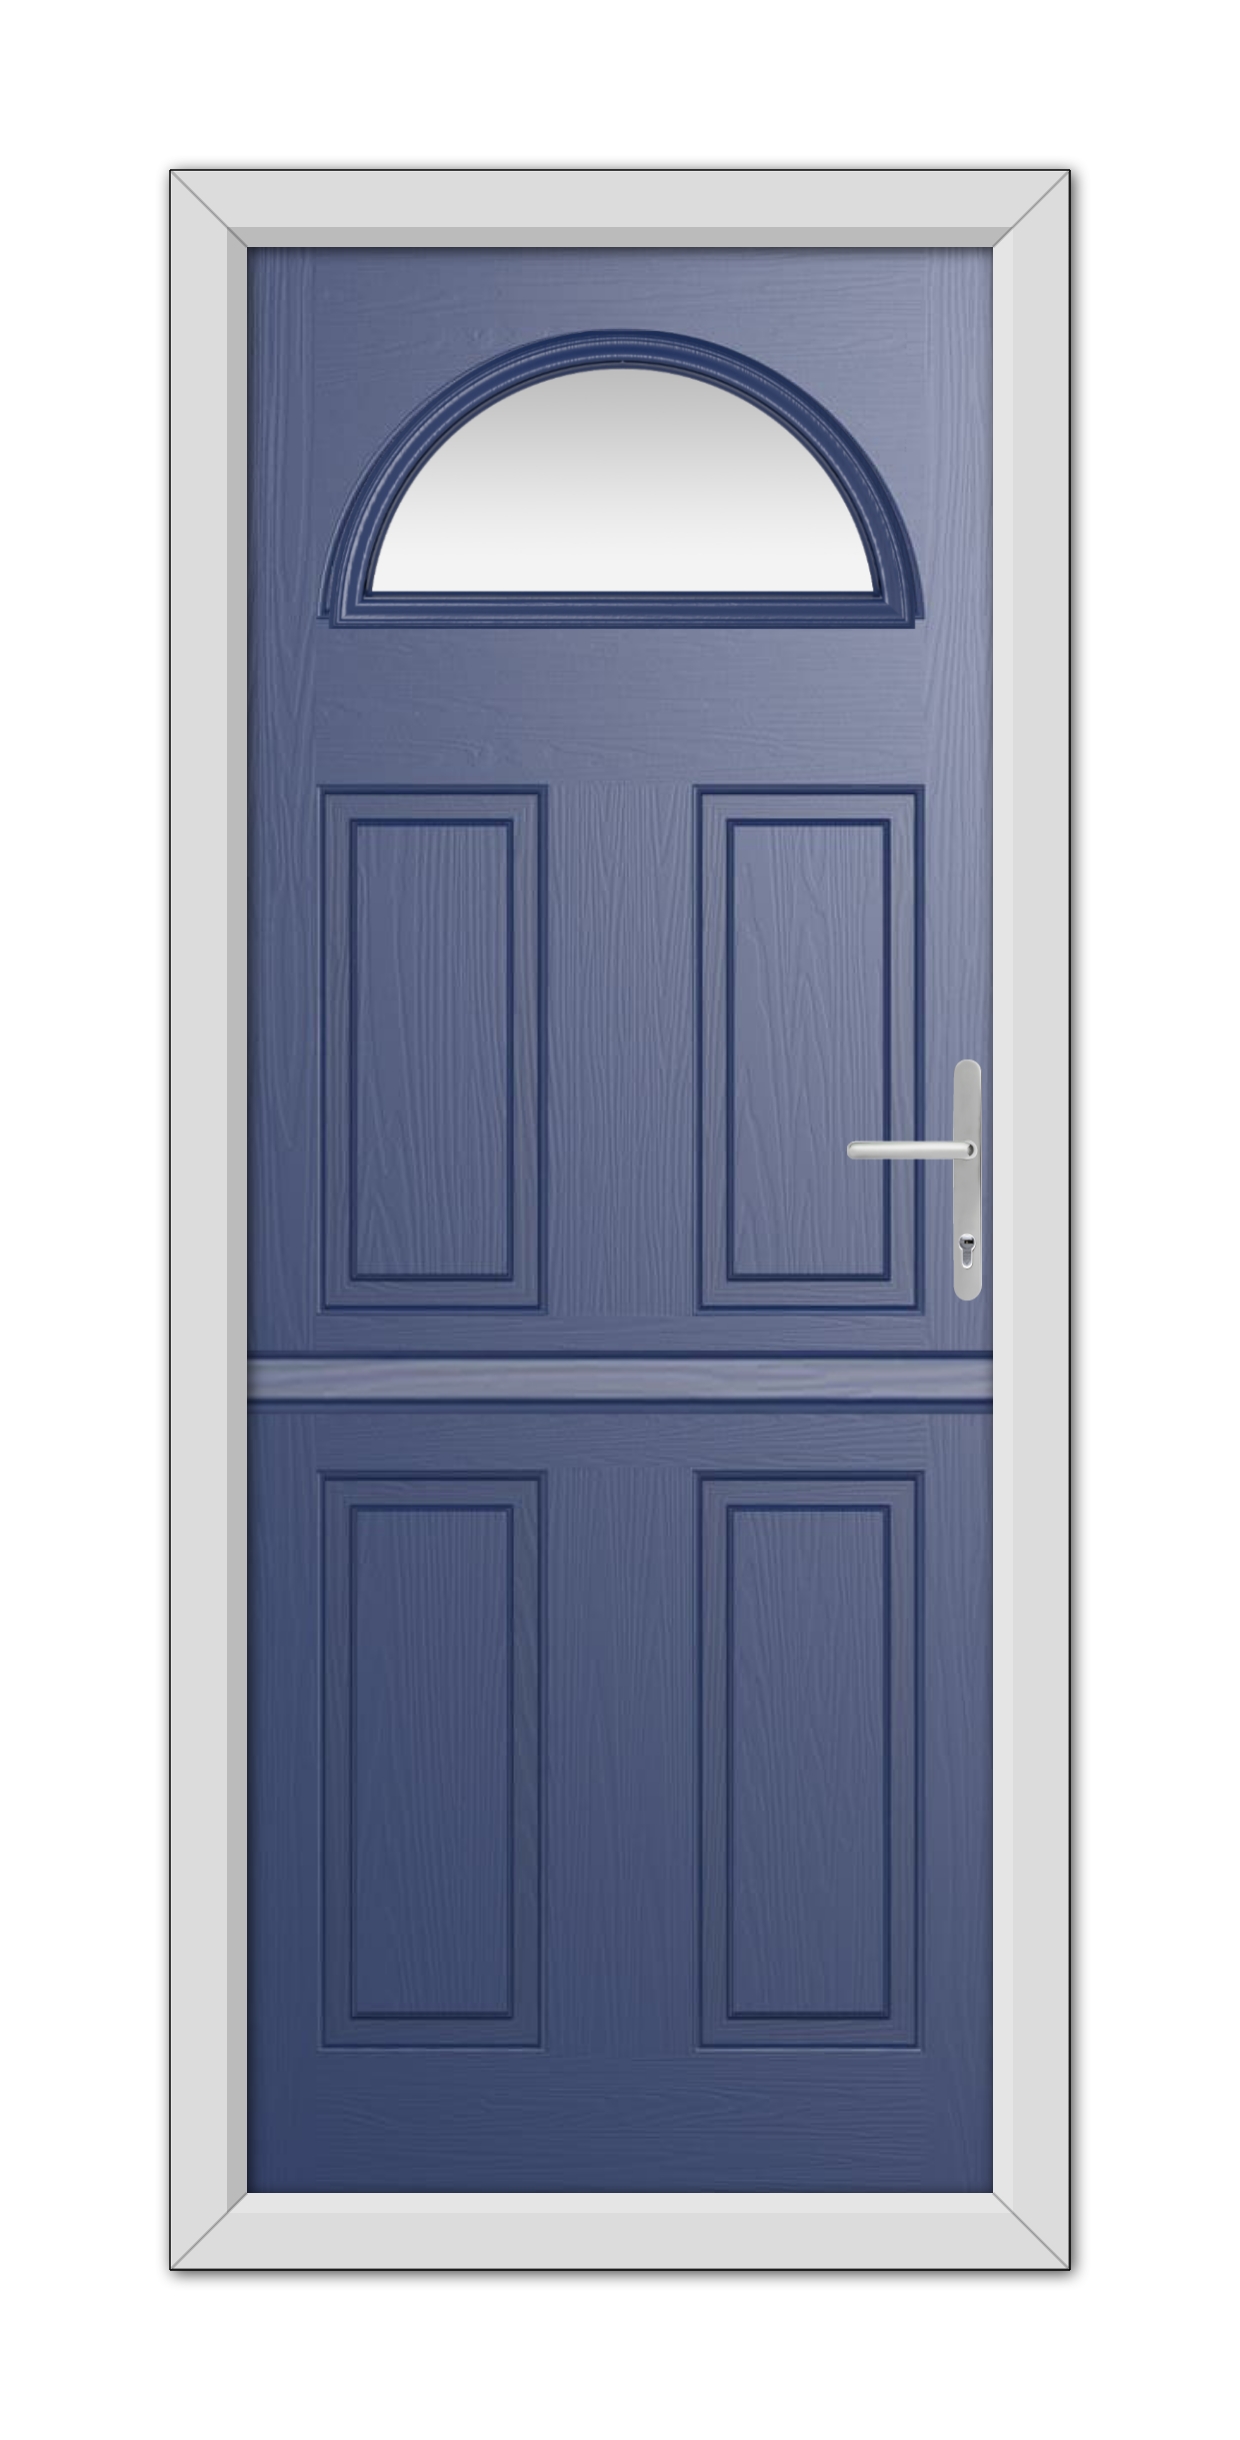 A Blue Winslow 1 Stable Composite Door 48mm Timber Core with six panels and an arched window at the top, set in a white frame, equipped with a modern handle.